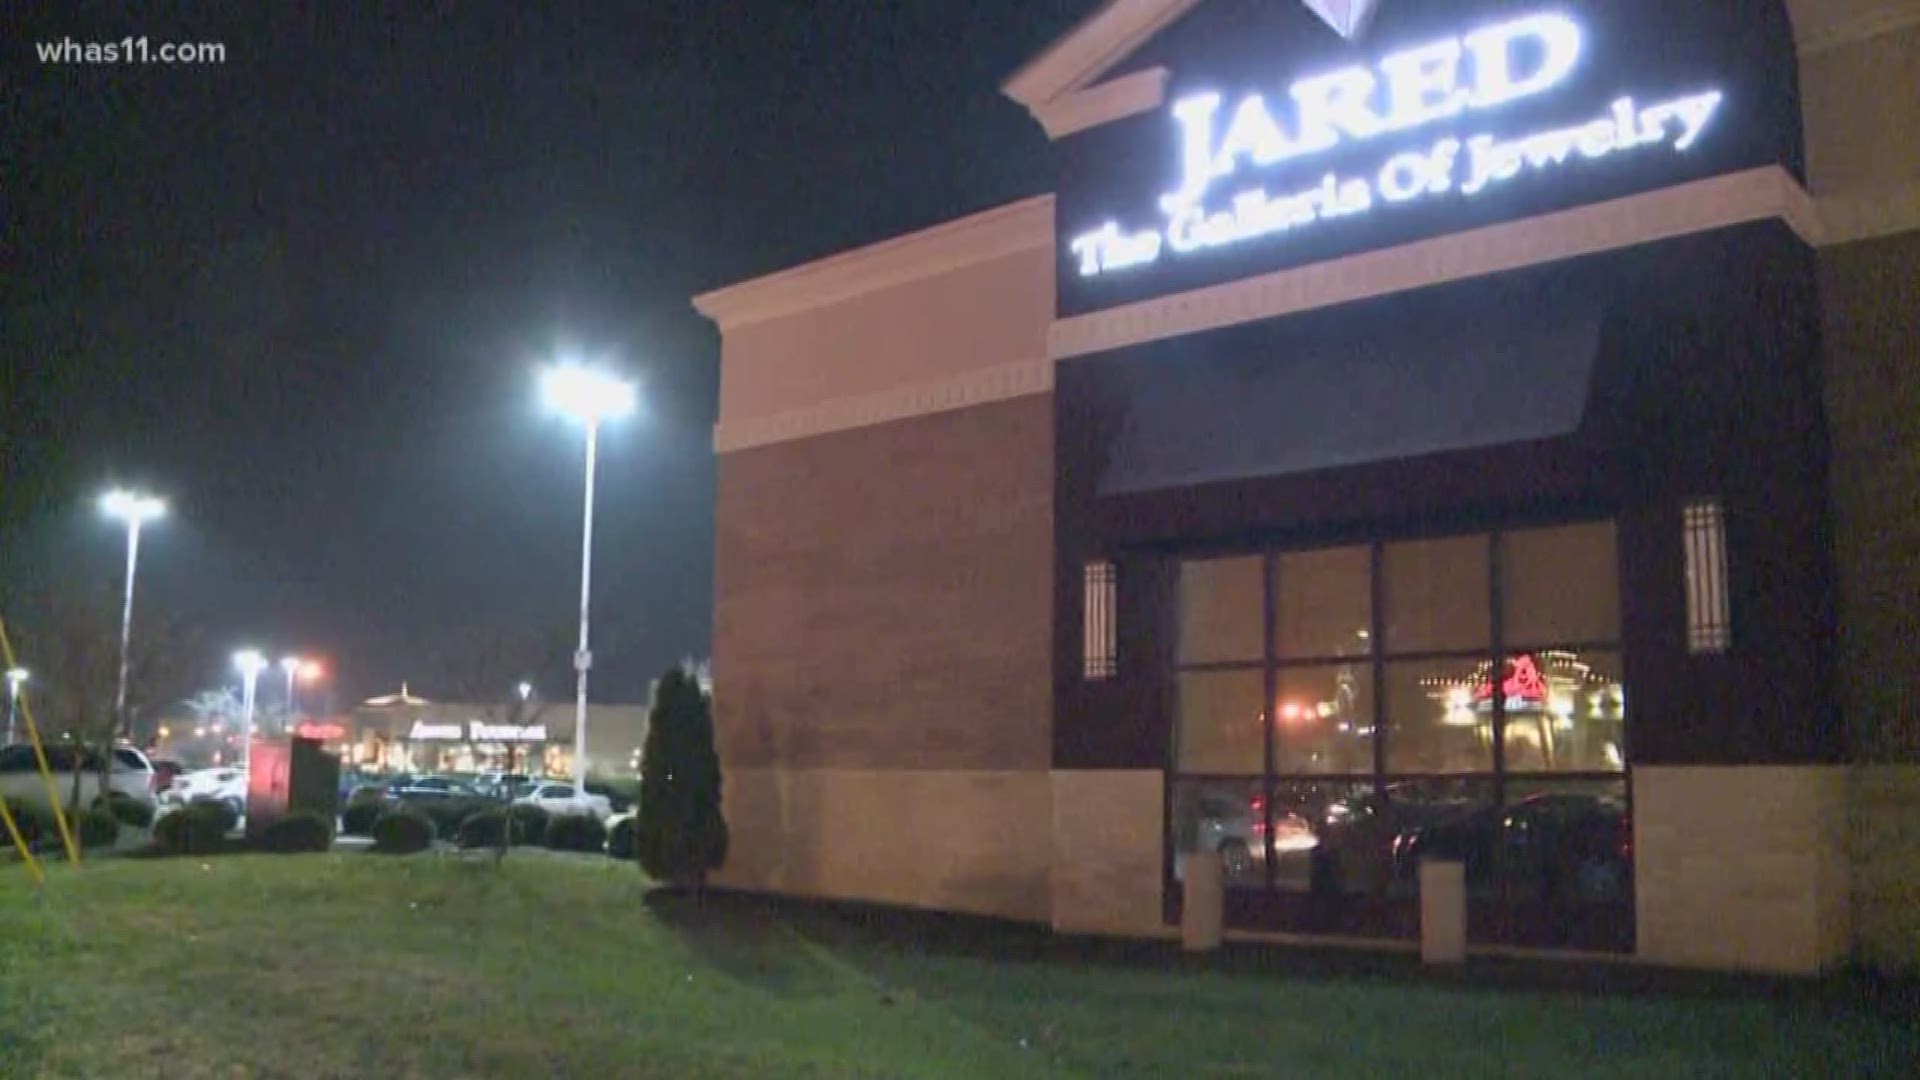 Police are searching for suspects following a Dec. 30 robbery of a Jared store on Shelbyville Road in St. Matthews.